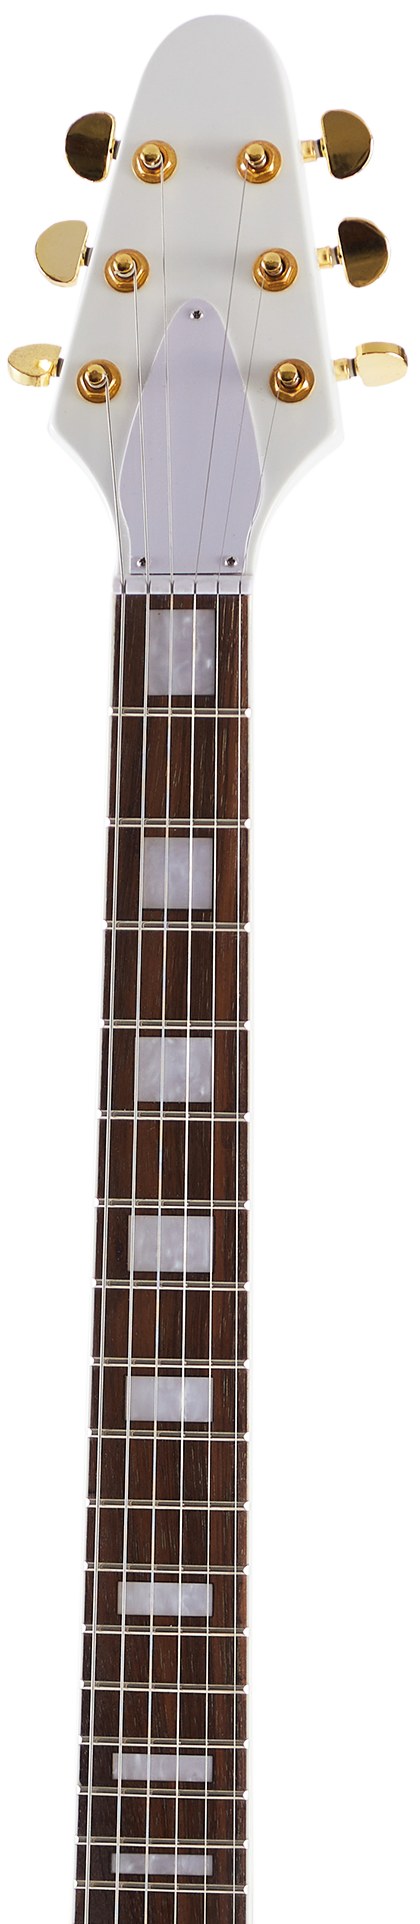 Close-up view of guitar strings, made of steel, creating the essential sound when plucked or strummed on an acoustic or electric guitar.